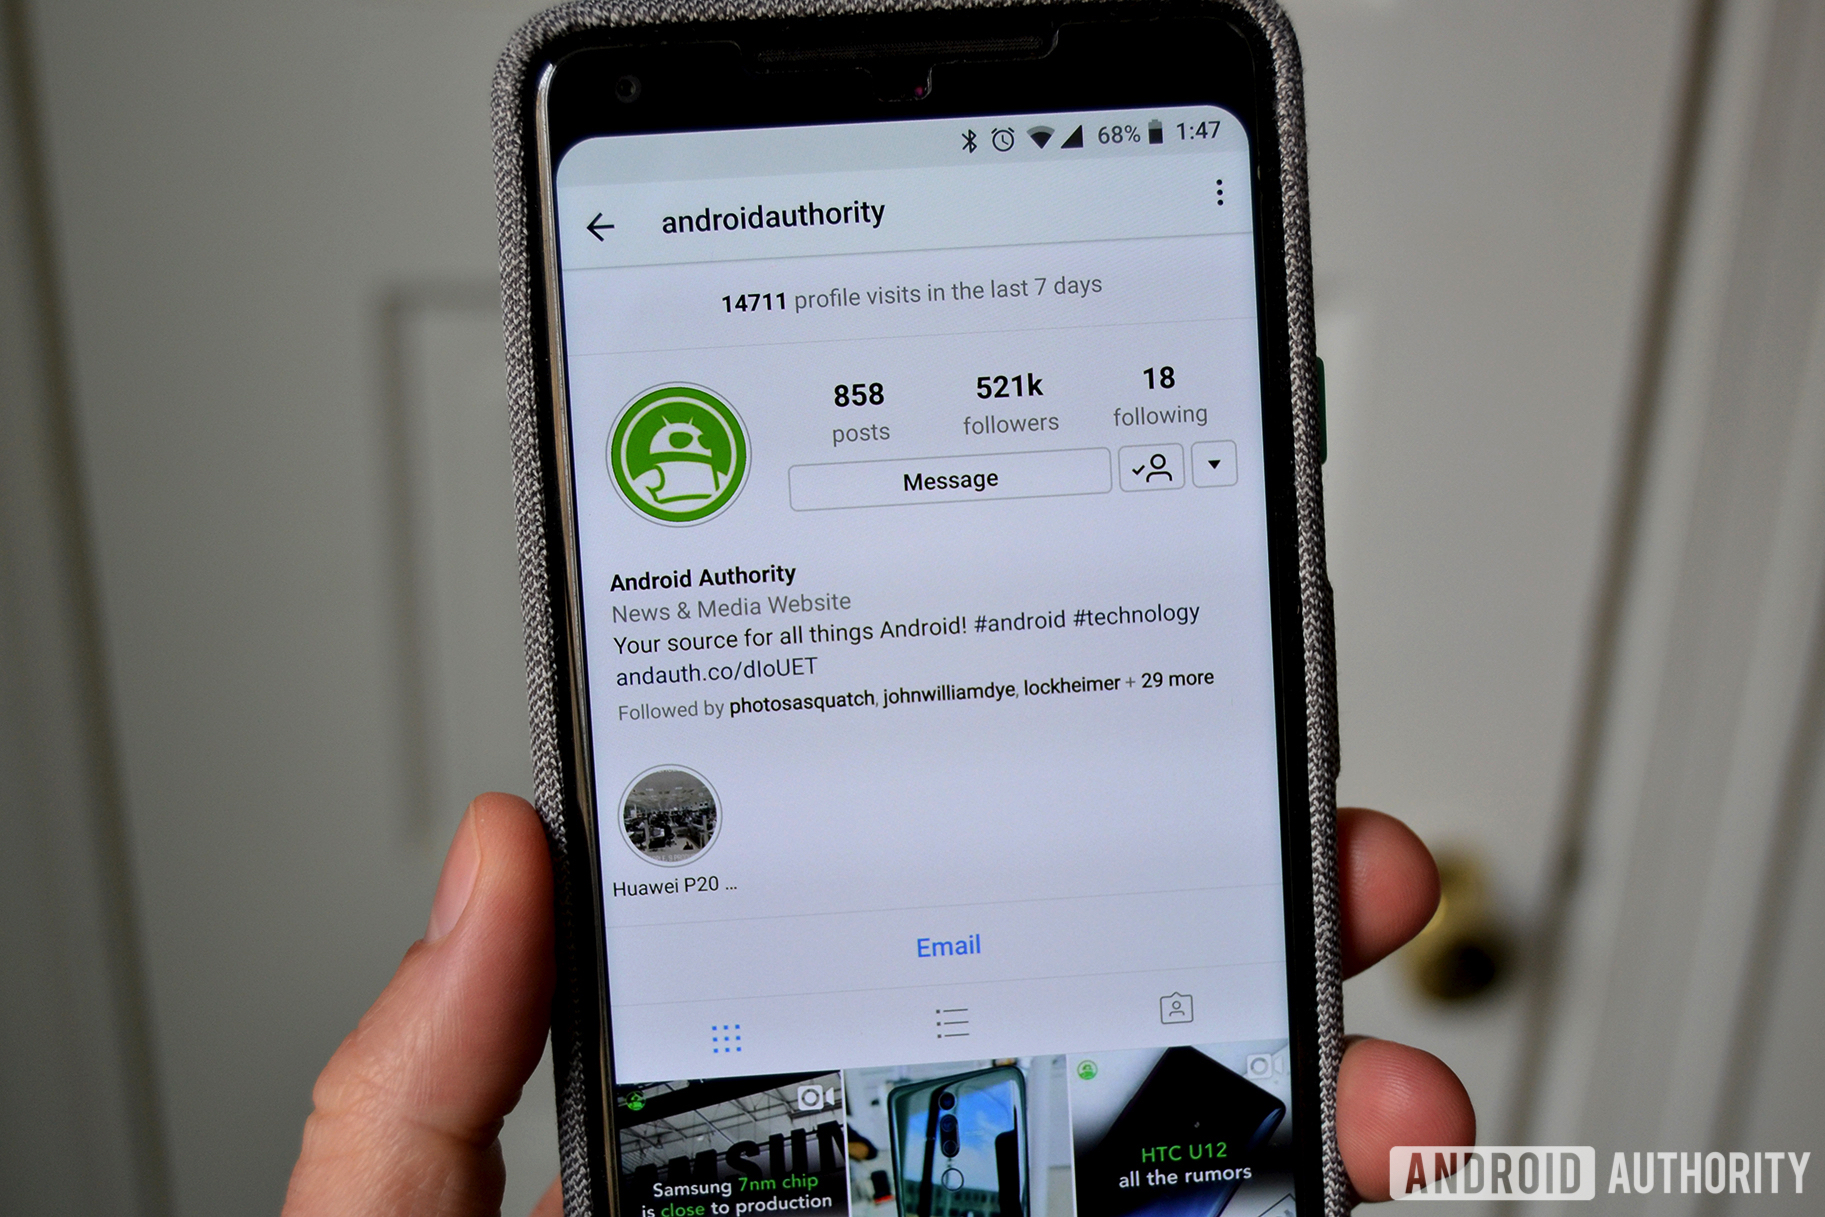 instagram android authority account